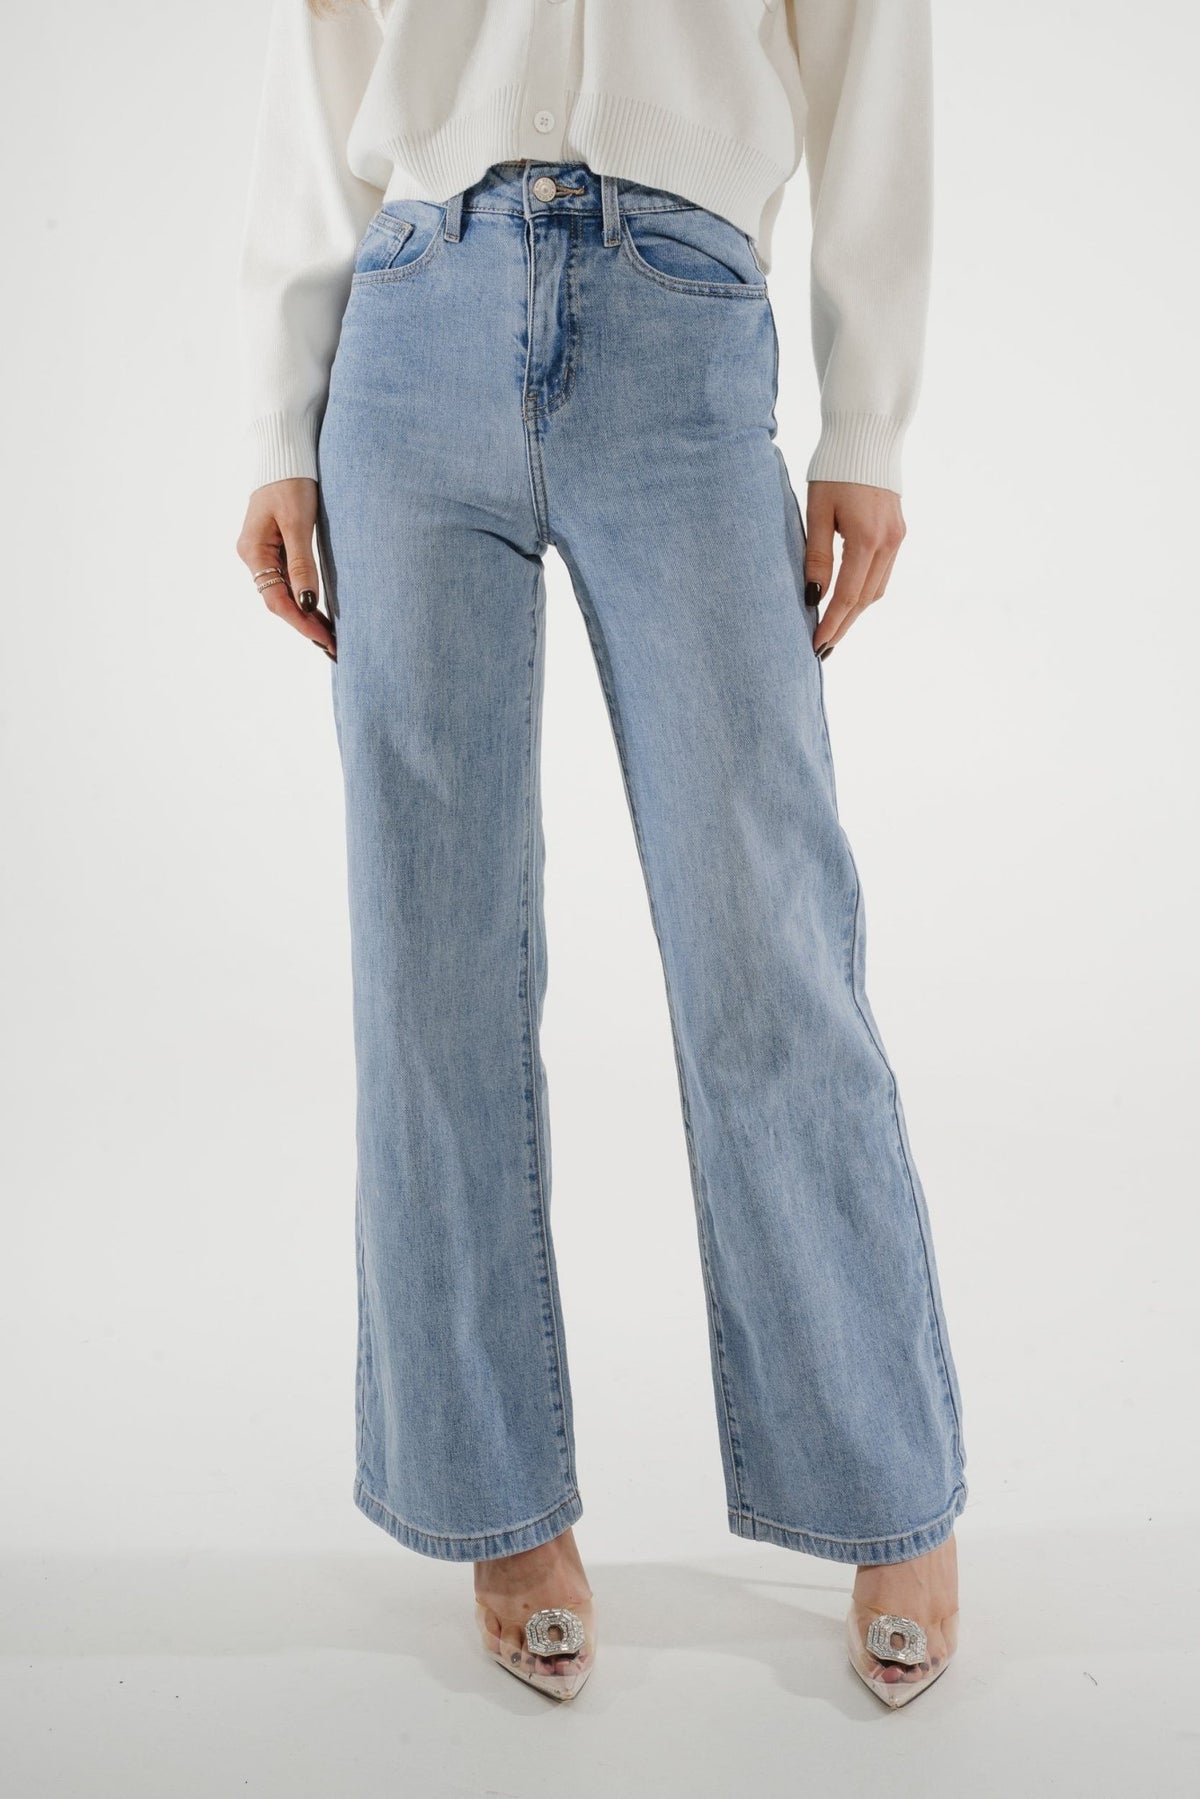 SALE - The Tamsin Wide Leg Denim – Mainland Collective